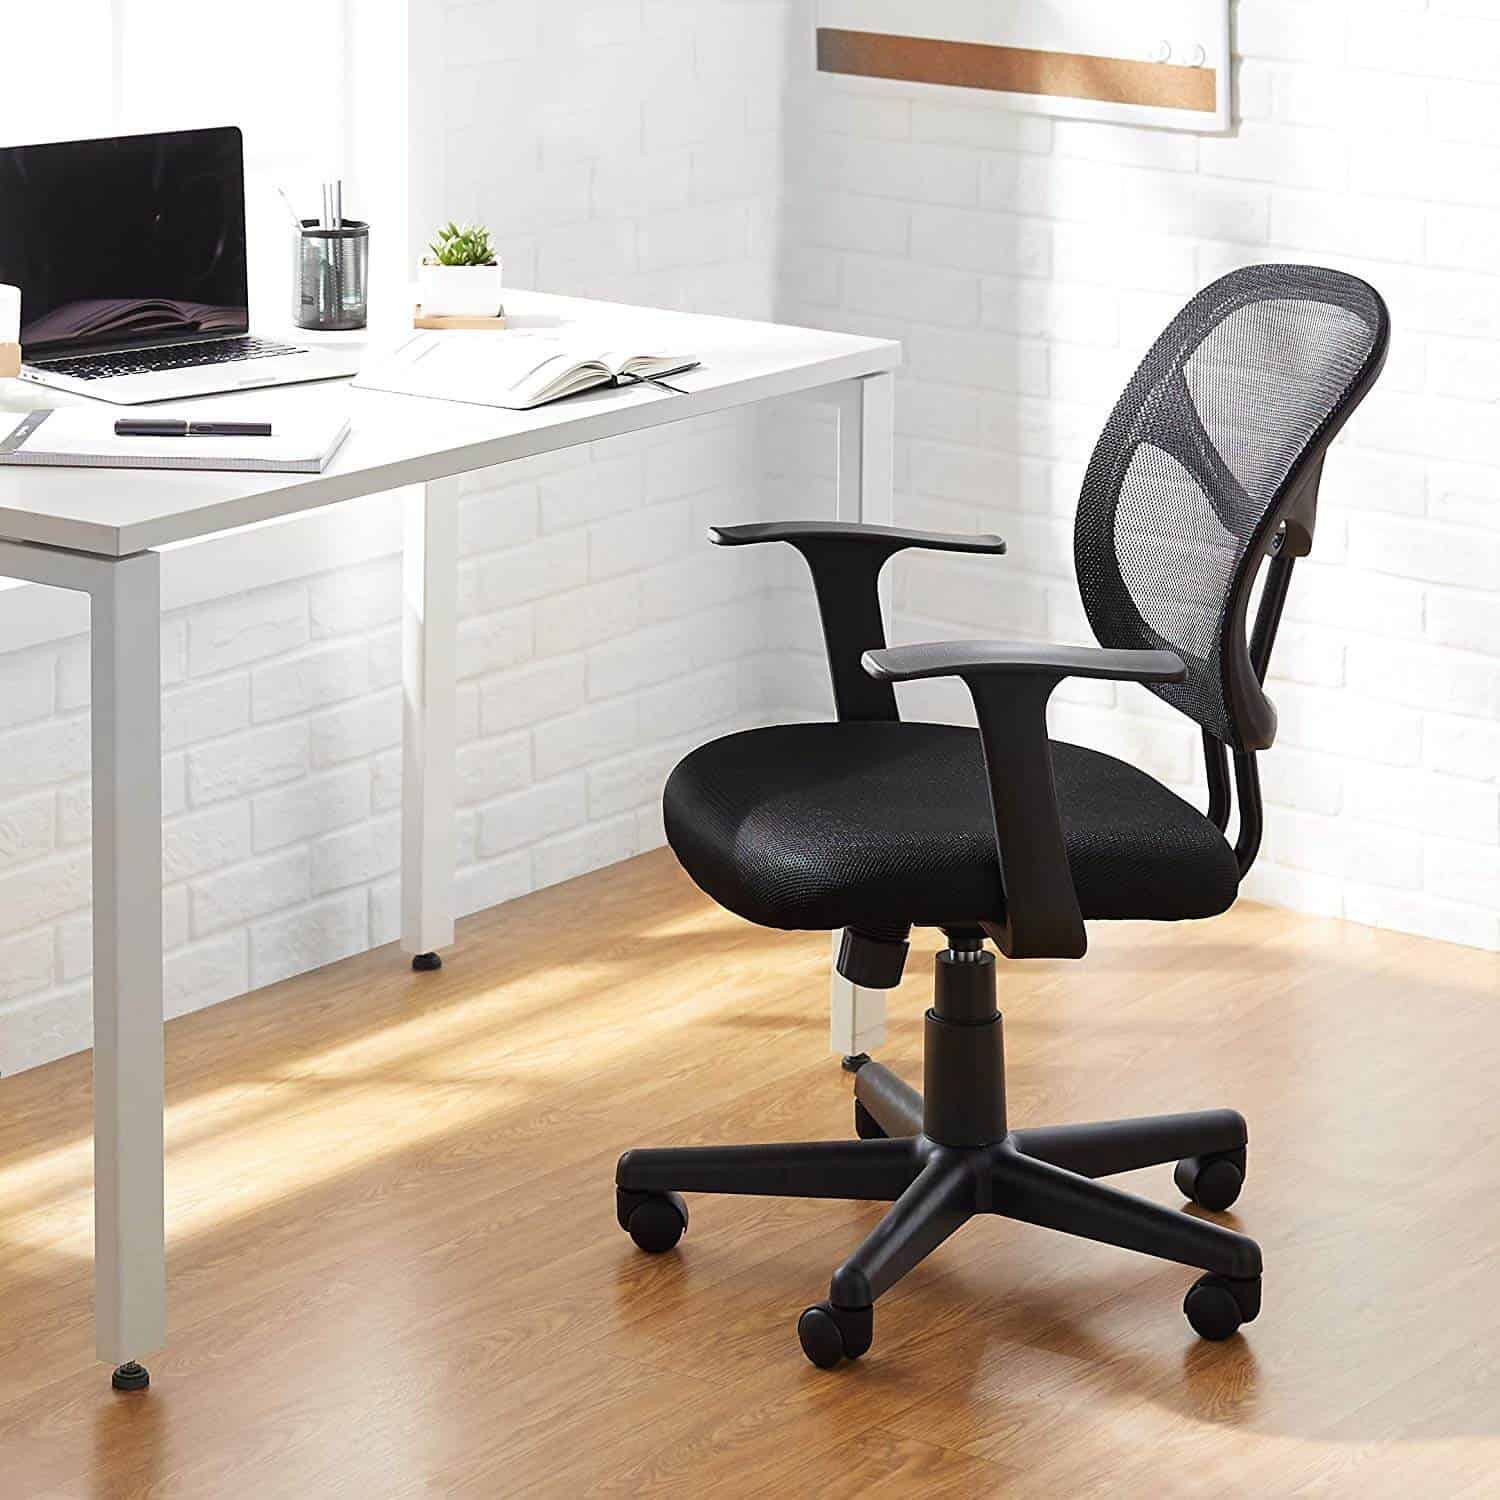 Best Office Chair For Short Person With Back Pain 02 Officesolutionpro.com  